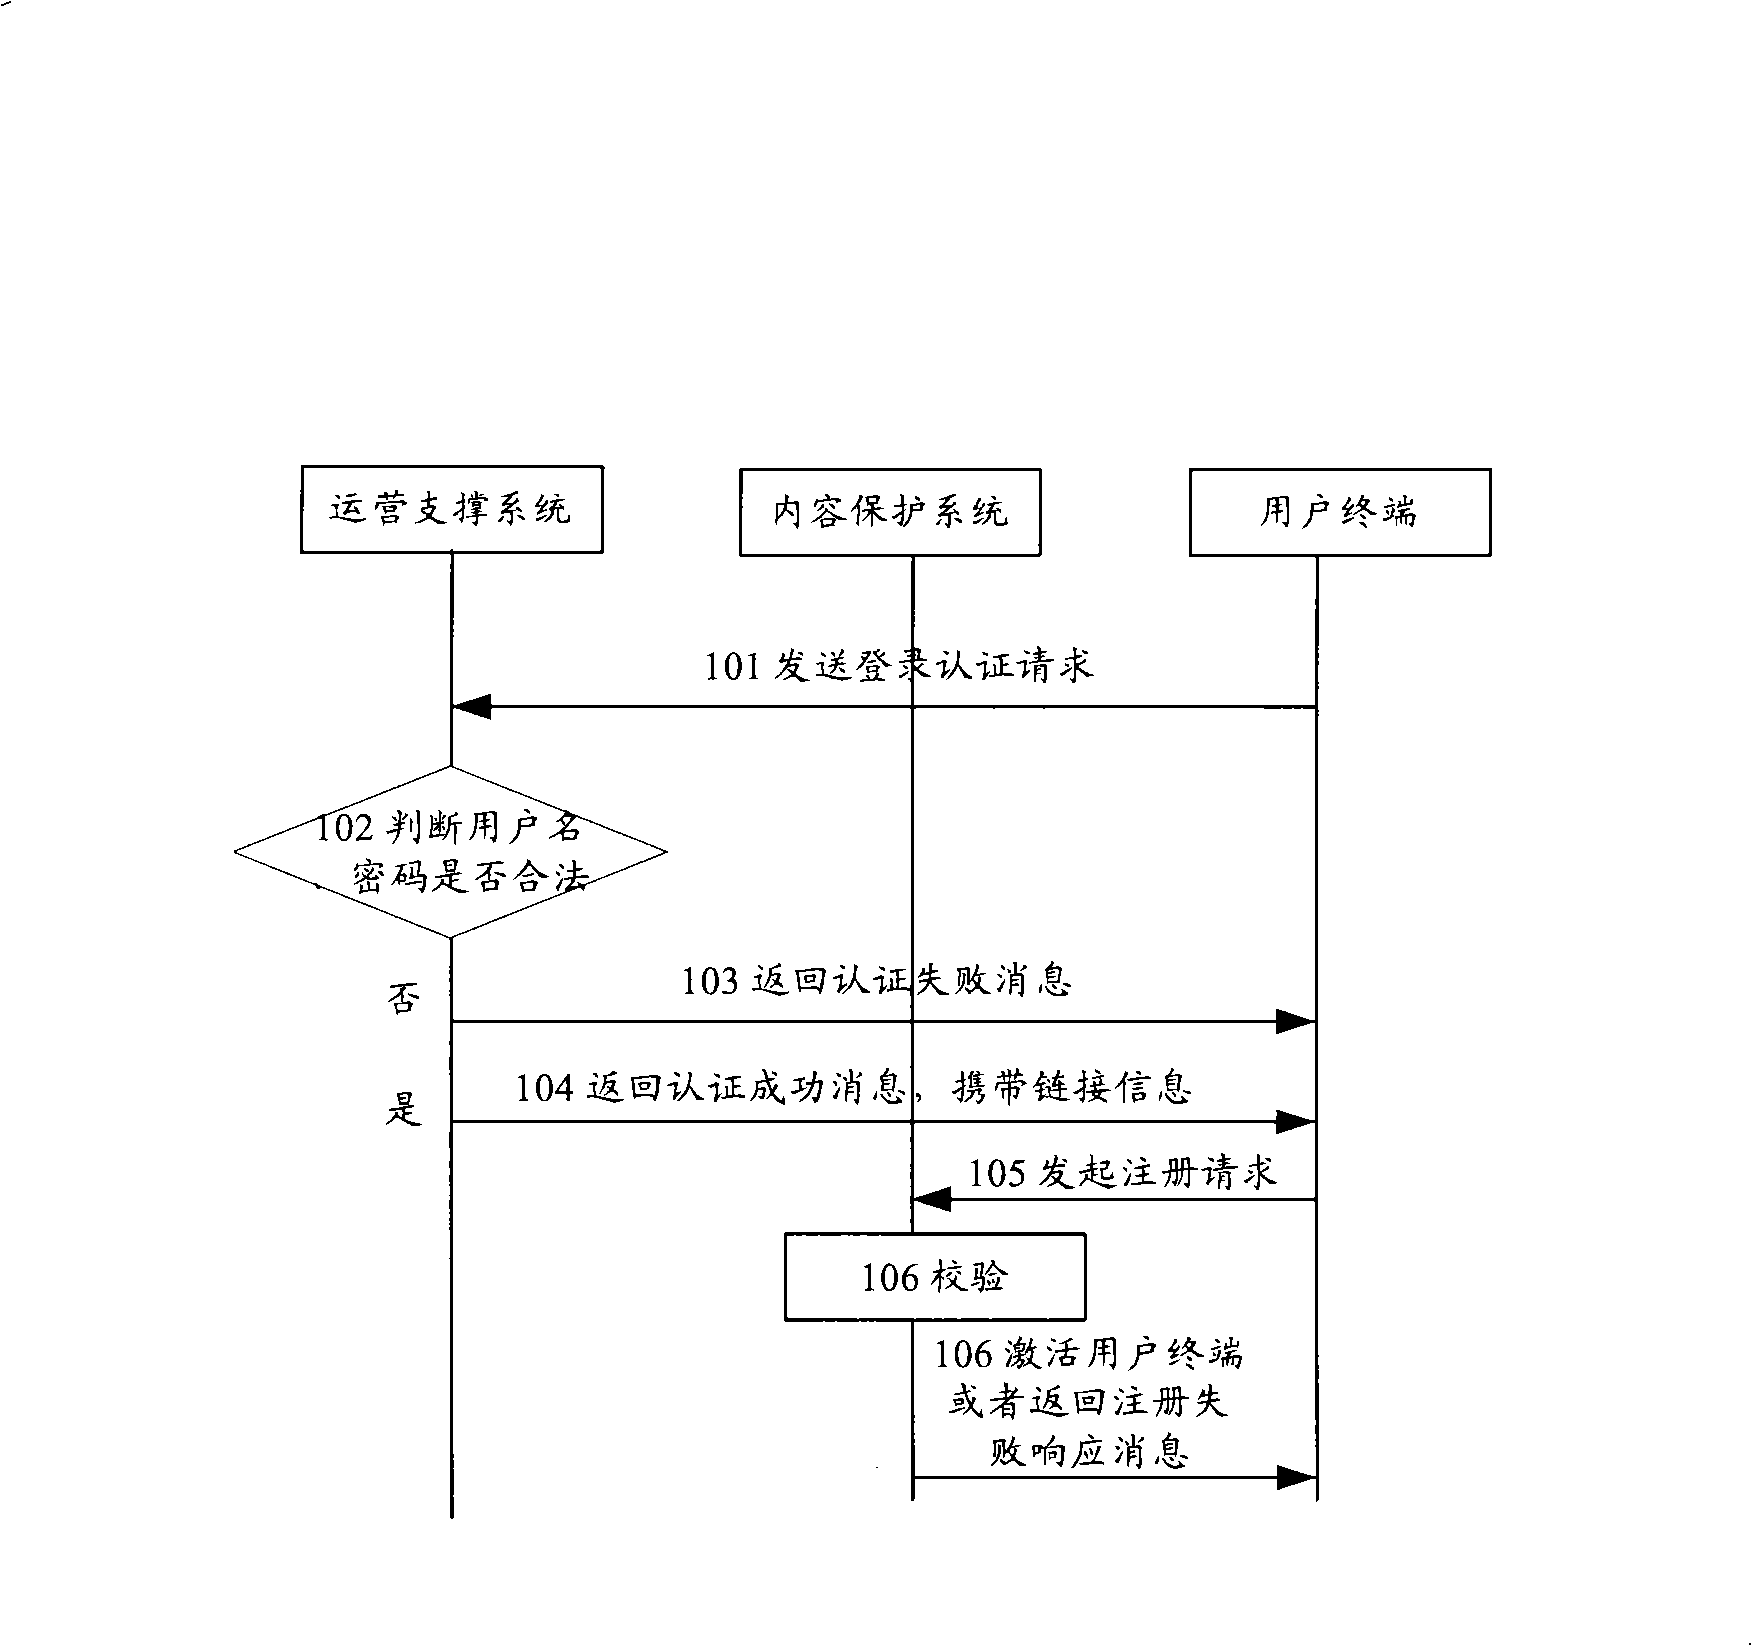 Method and system for sharing ordered business contents